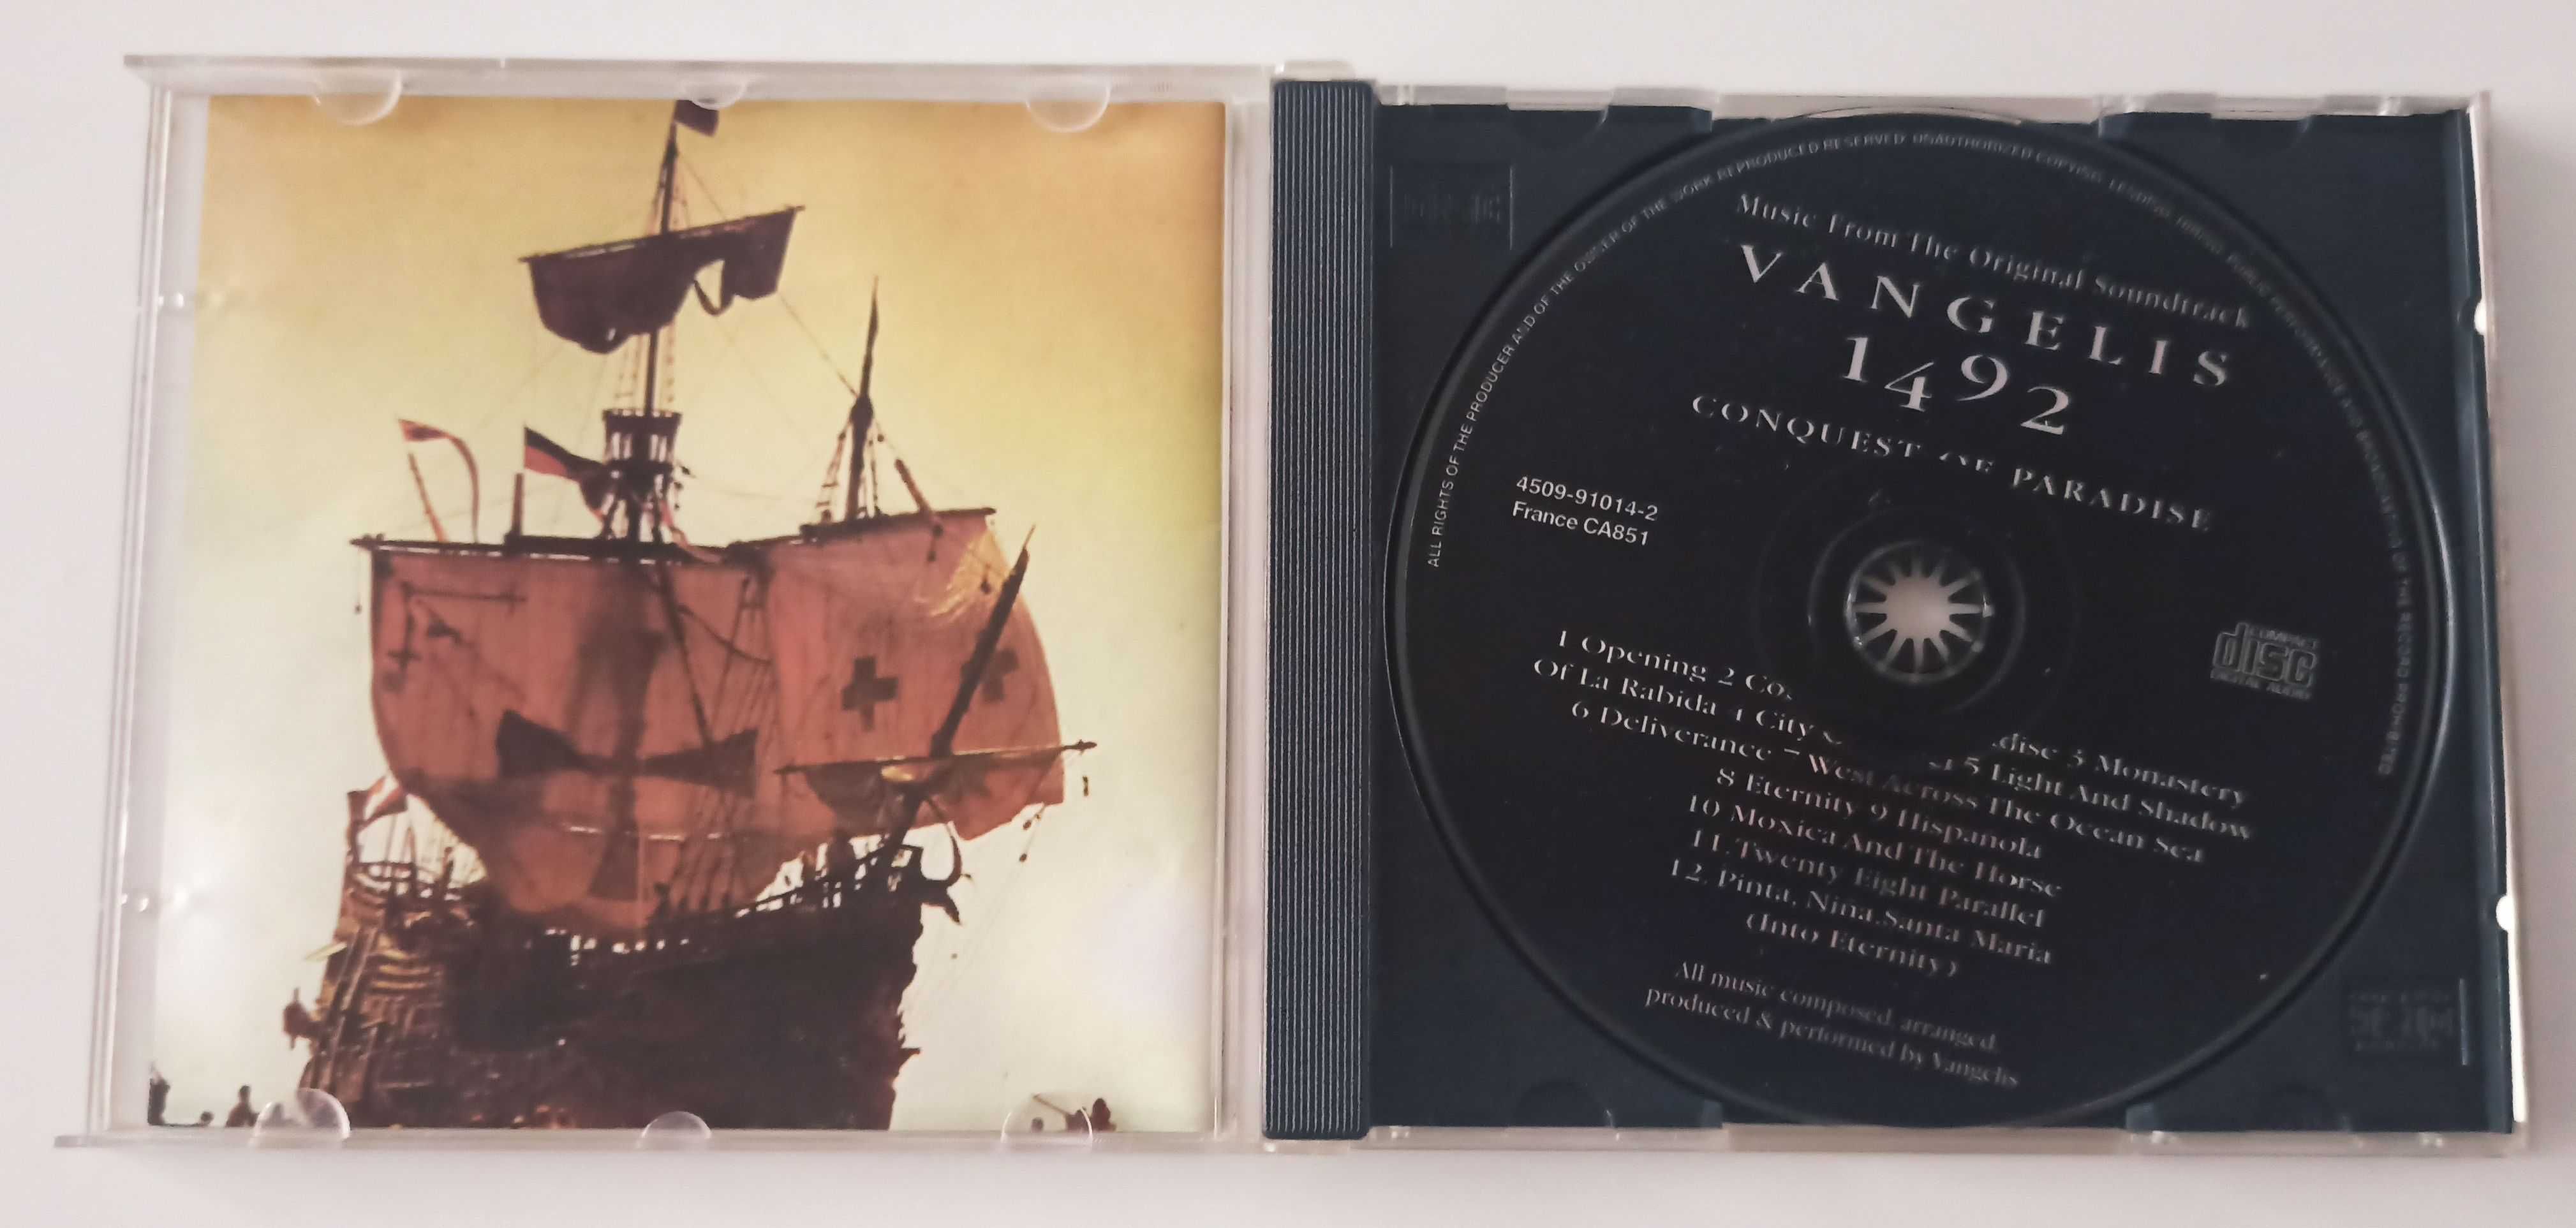 Vangelis 1492 Conquest of paradise music from the original soundtrack